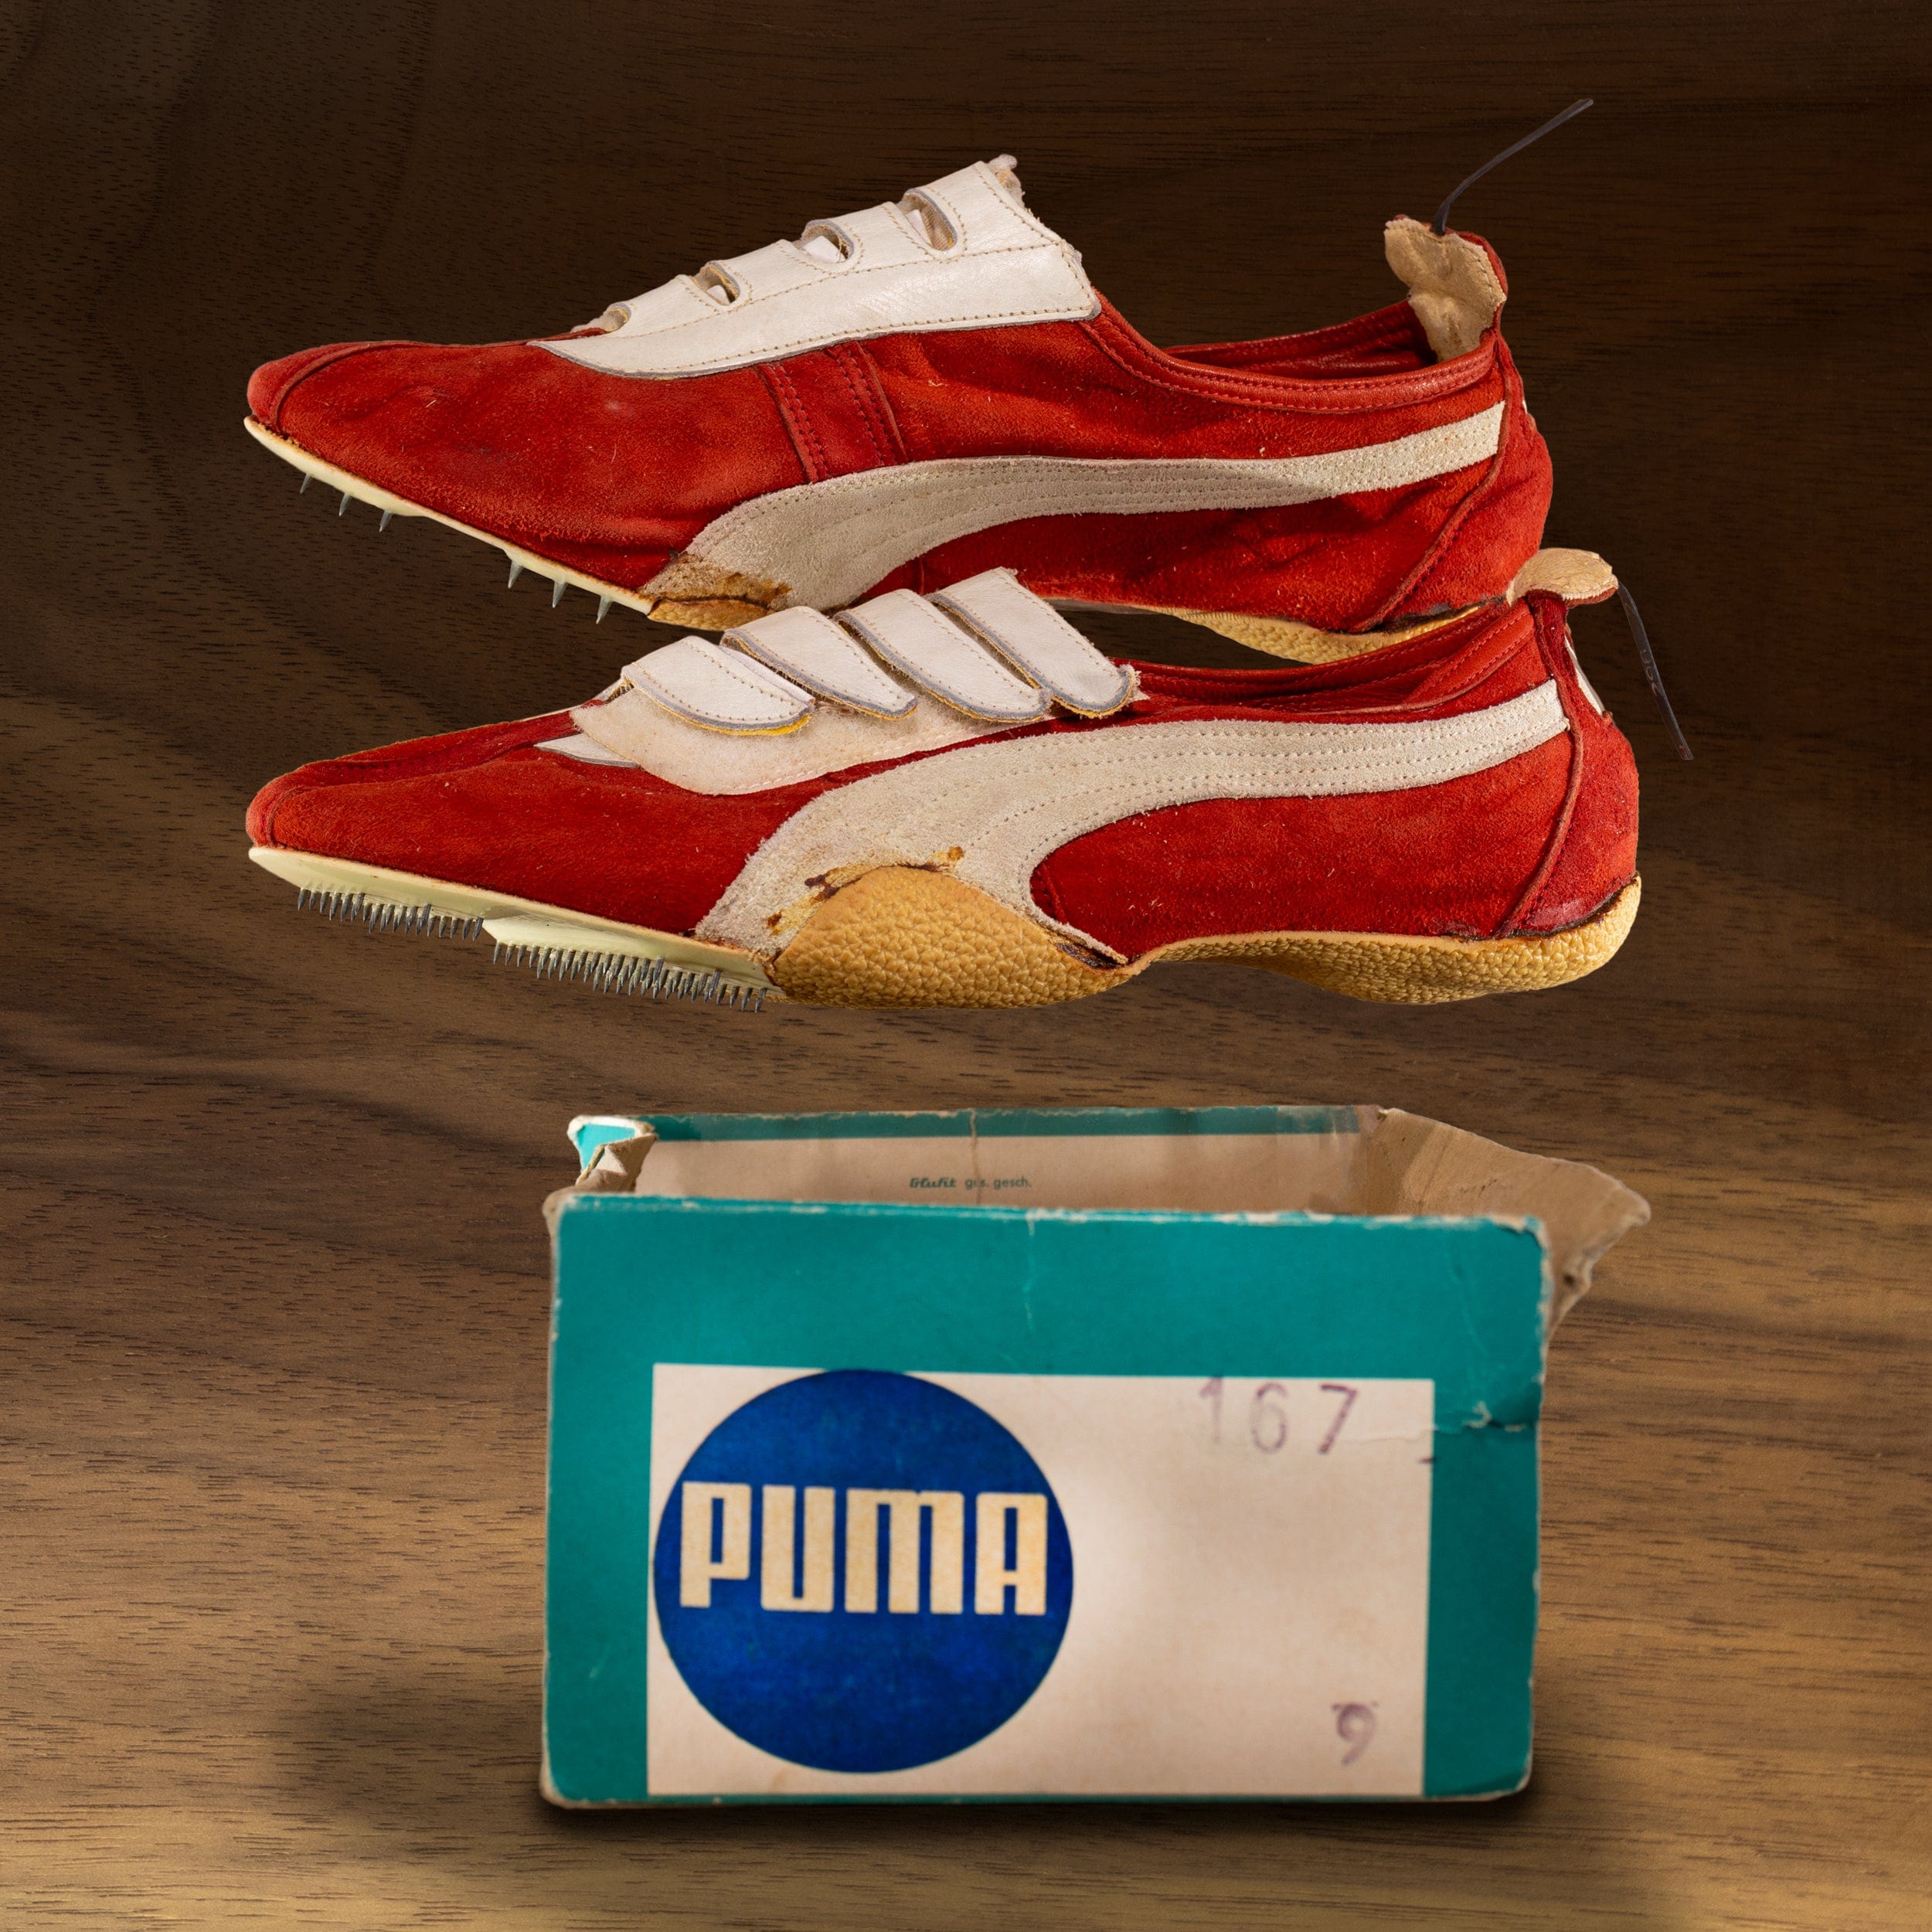 Where Are Puma Shoes Sold?